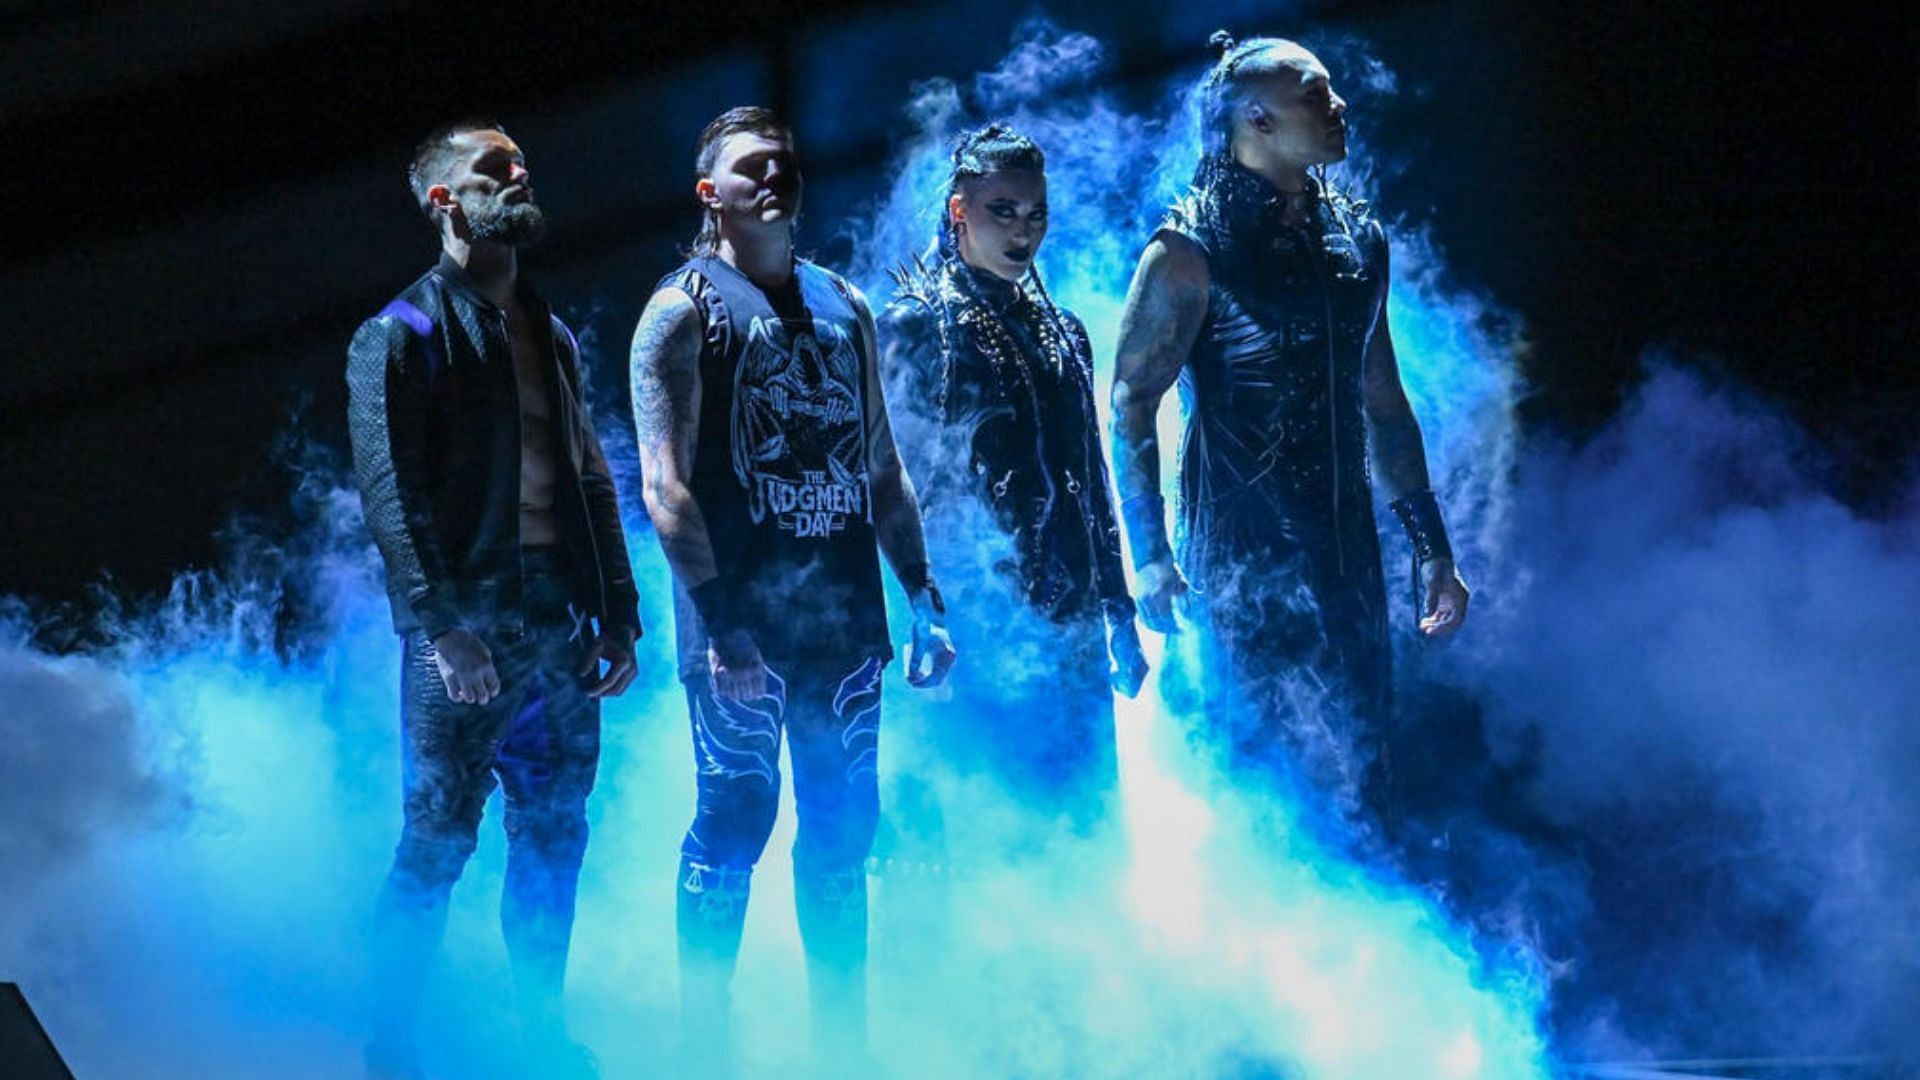 The Judgment Day is one of the most feared factions in WWE